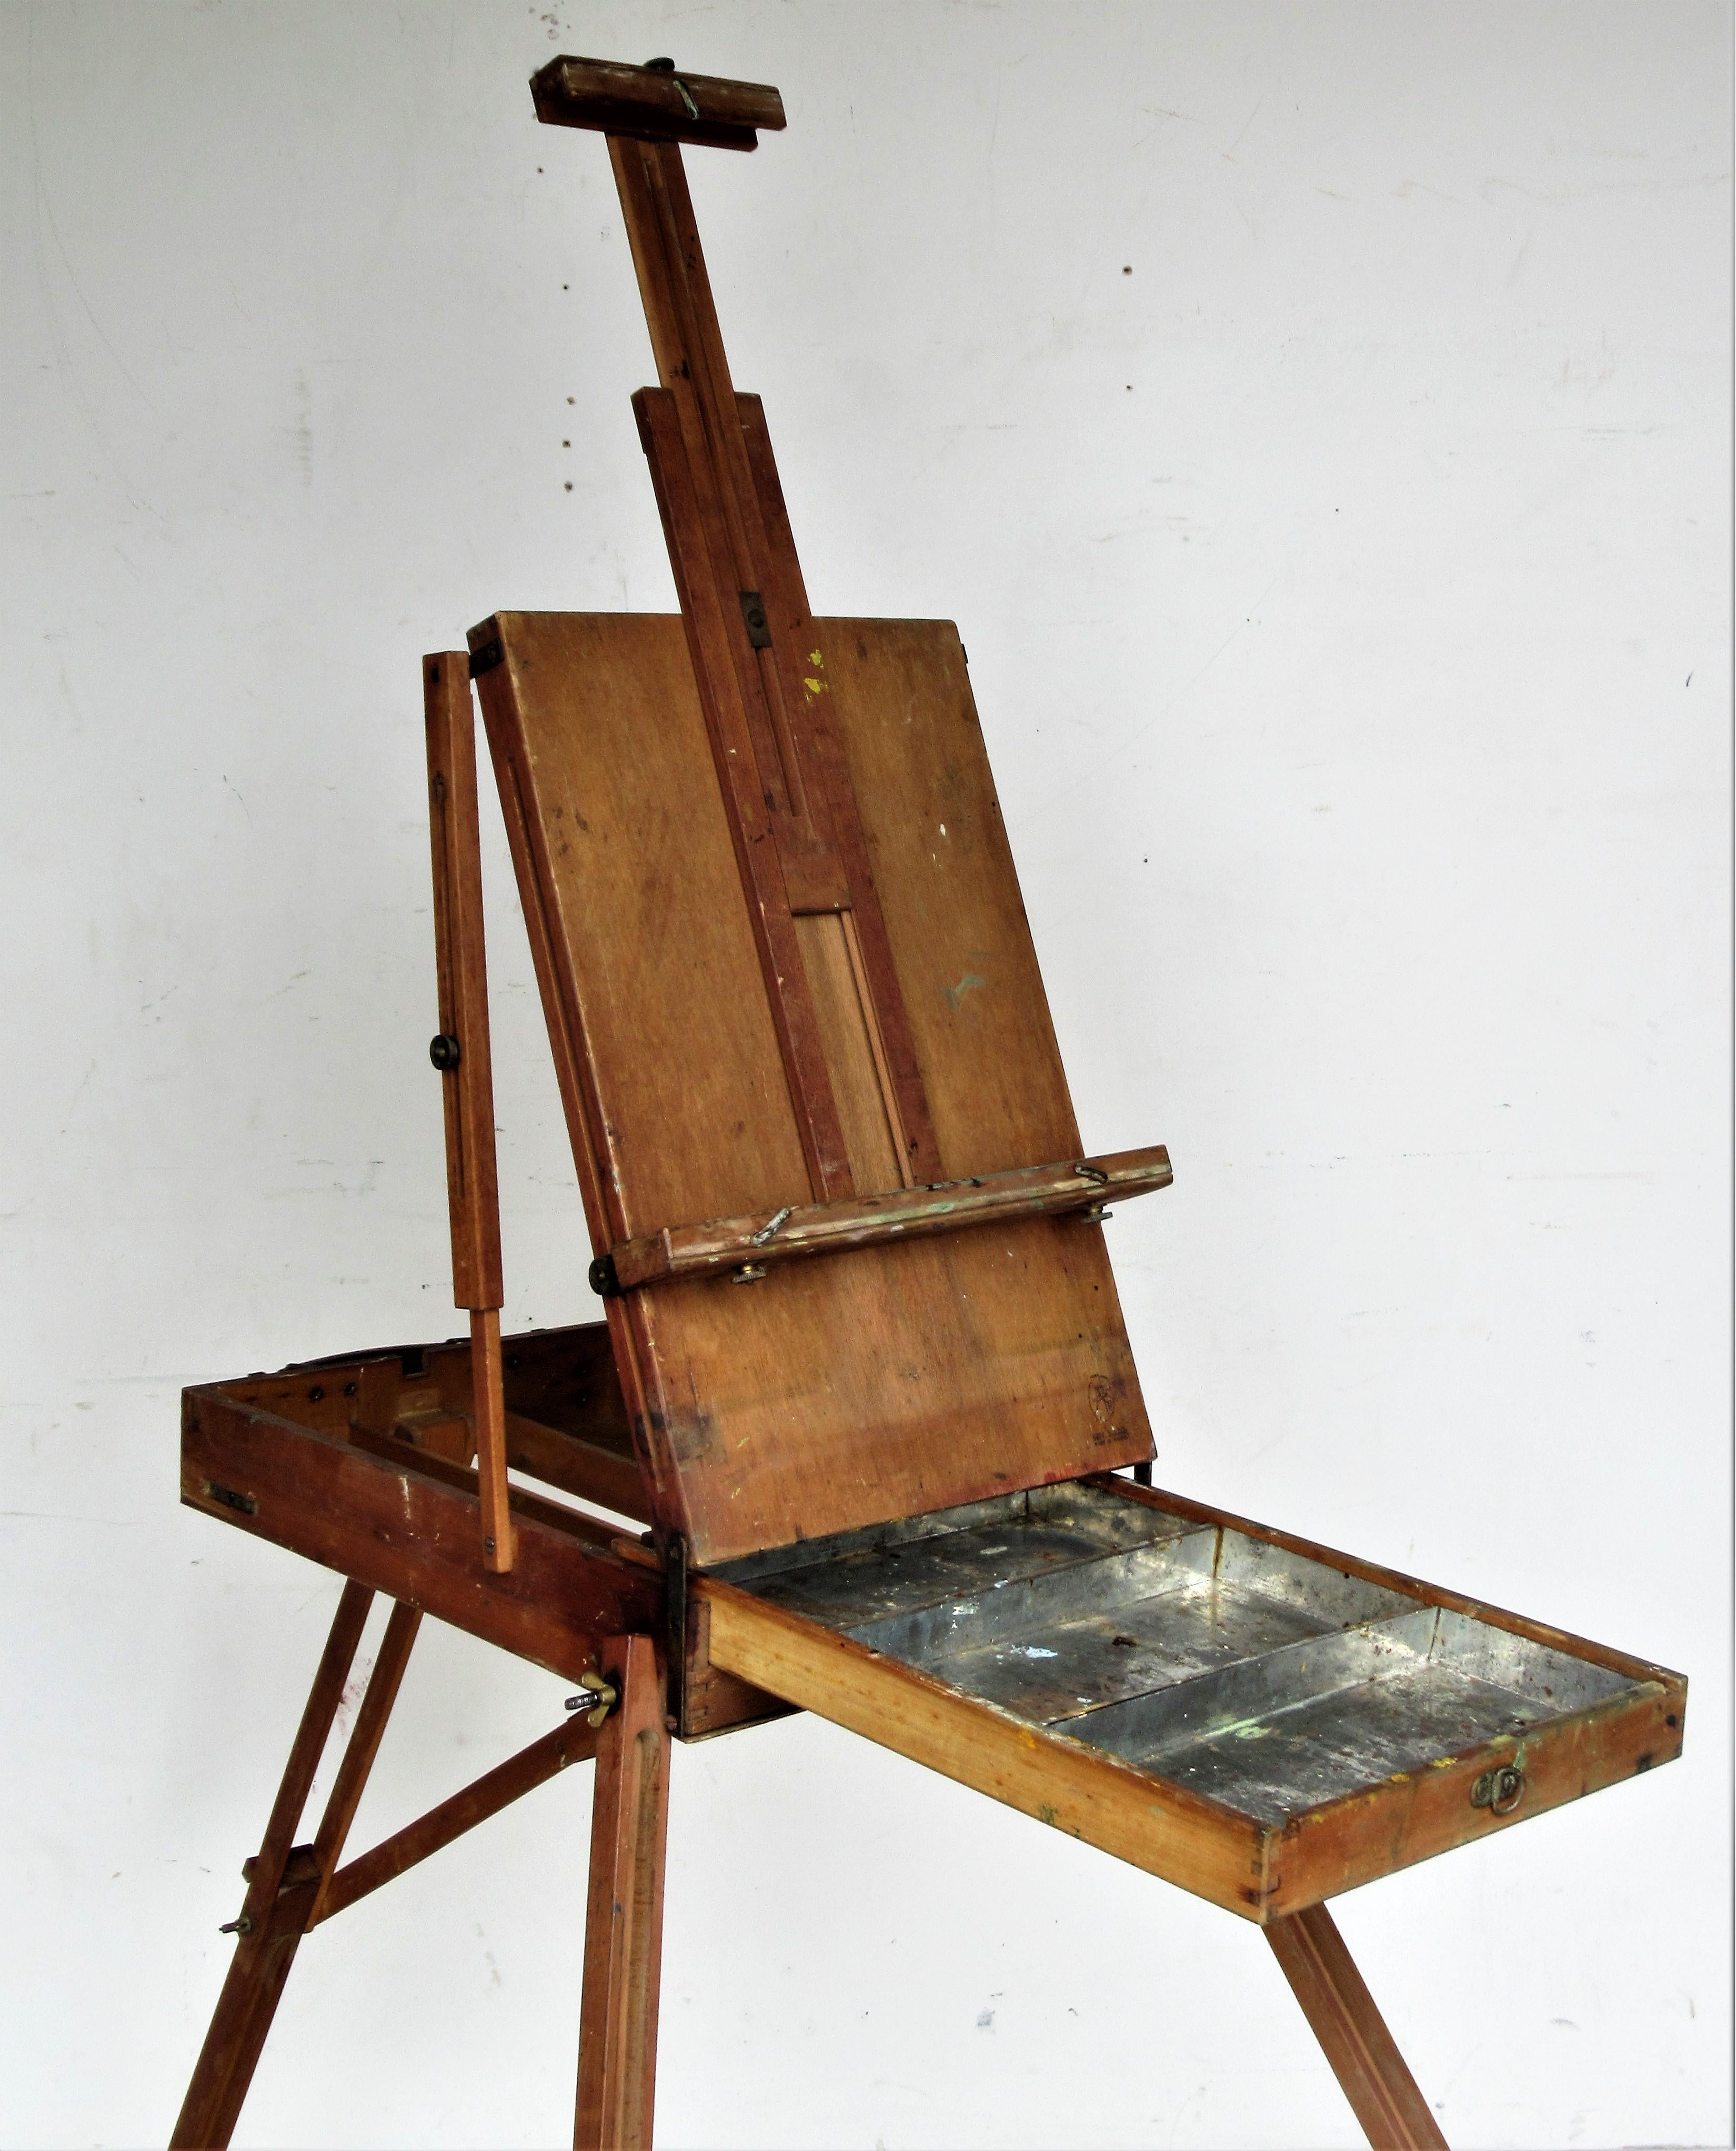 Vintage portable painters box with adjustable height and angle three leg floor easel for traveling / Plein air painting. Overall nicely aged original old patina color to wood and brass fittings with all parts present and working. Grumbacher - made